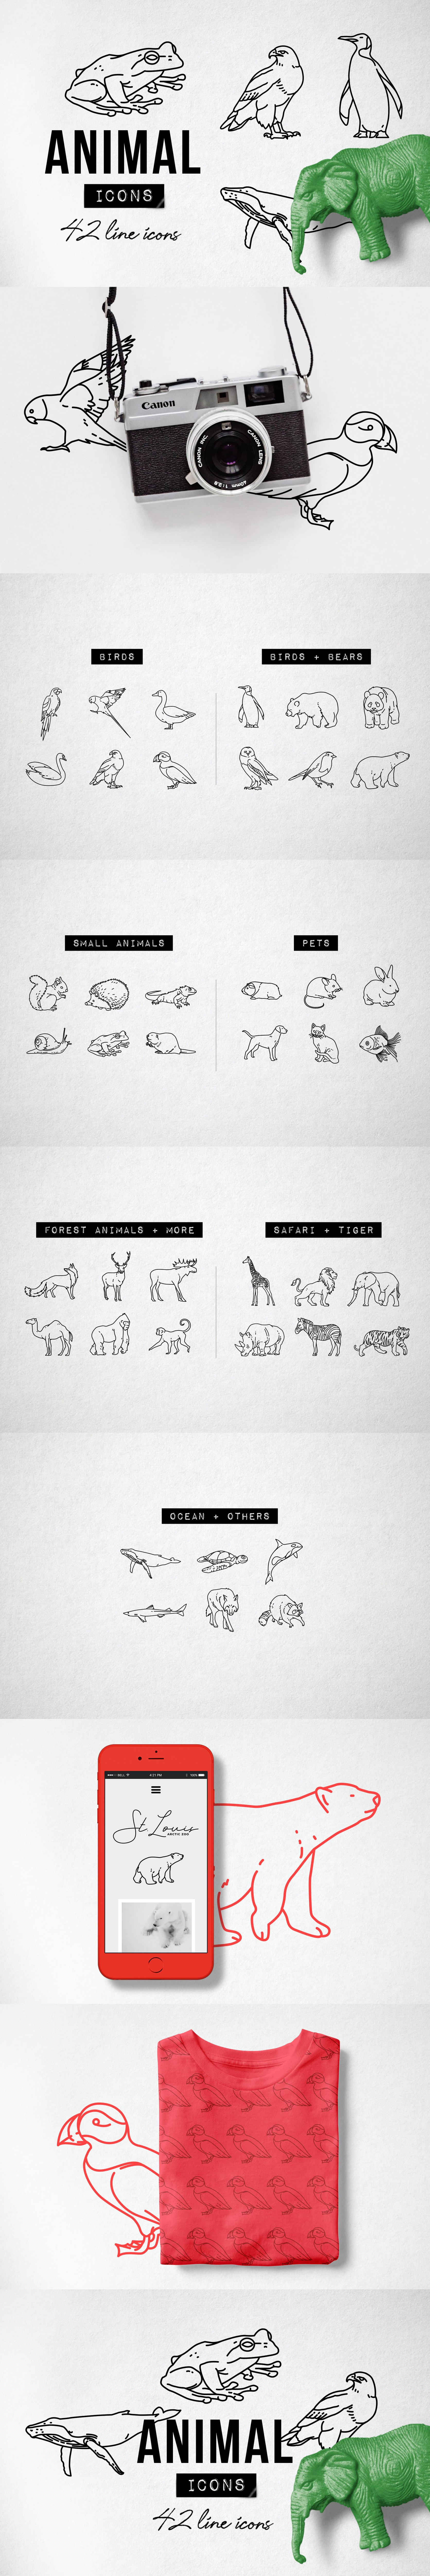 Wild Animal Icons Pack cover image.